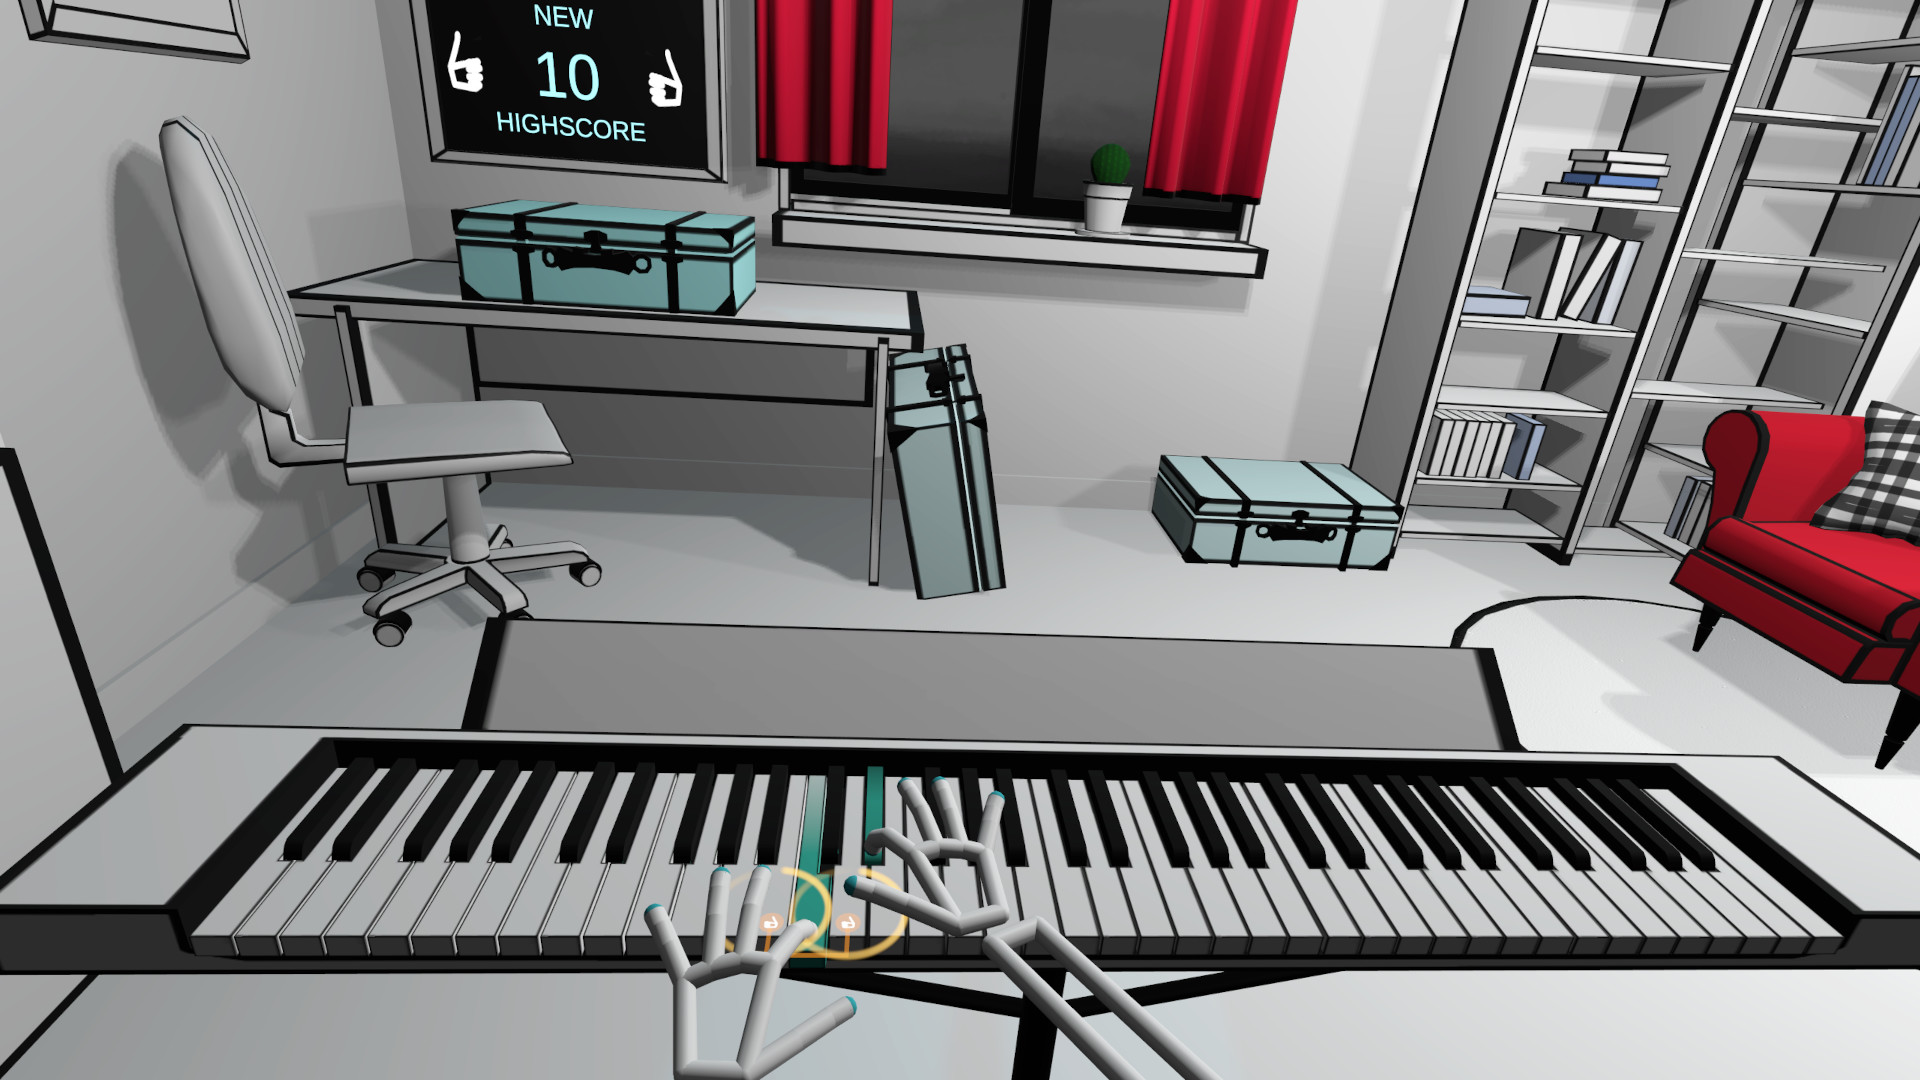 What's On Steam - VR Pianist